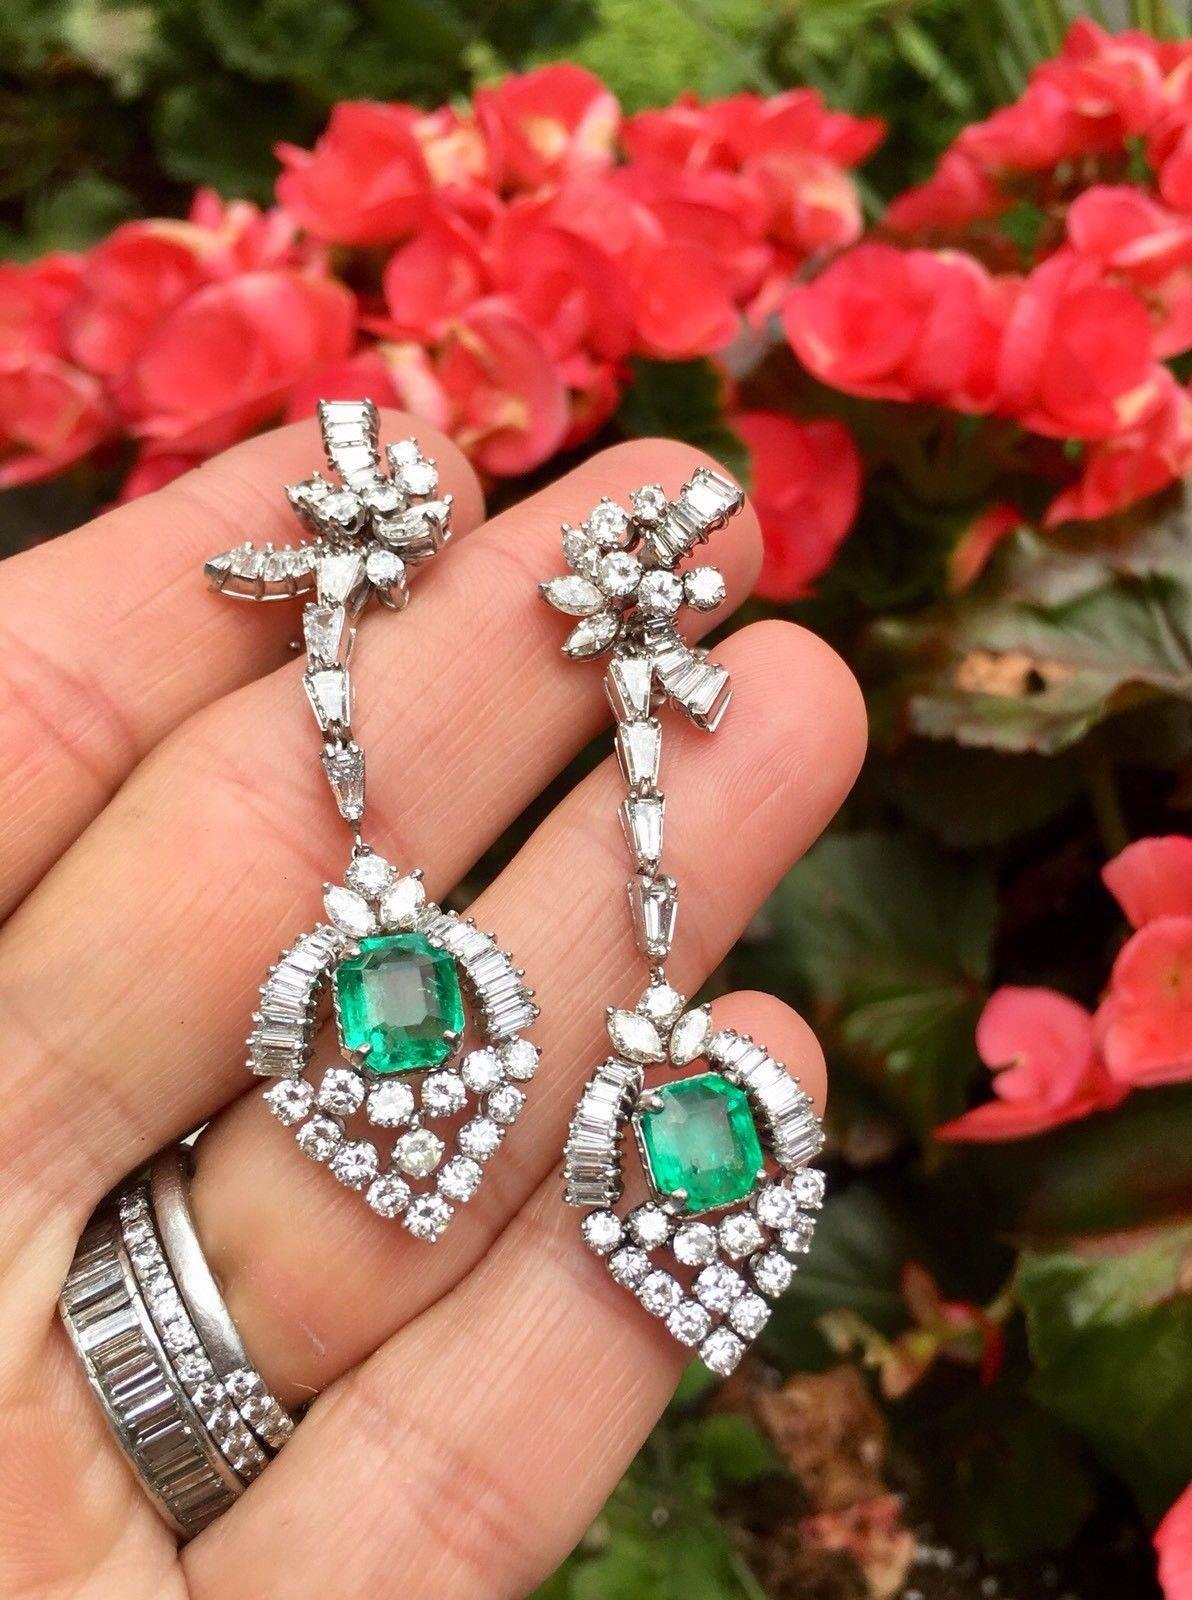 Midcentury 14 Karat Gold Estate Pair of 7 Carat VS Diamond Emerald Earrings In Excellent Condition For Sale In Shaker Heights, OH